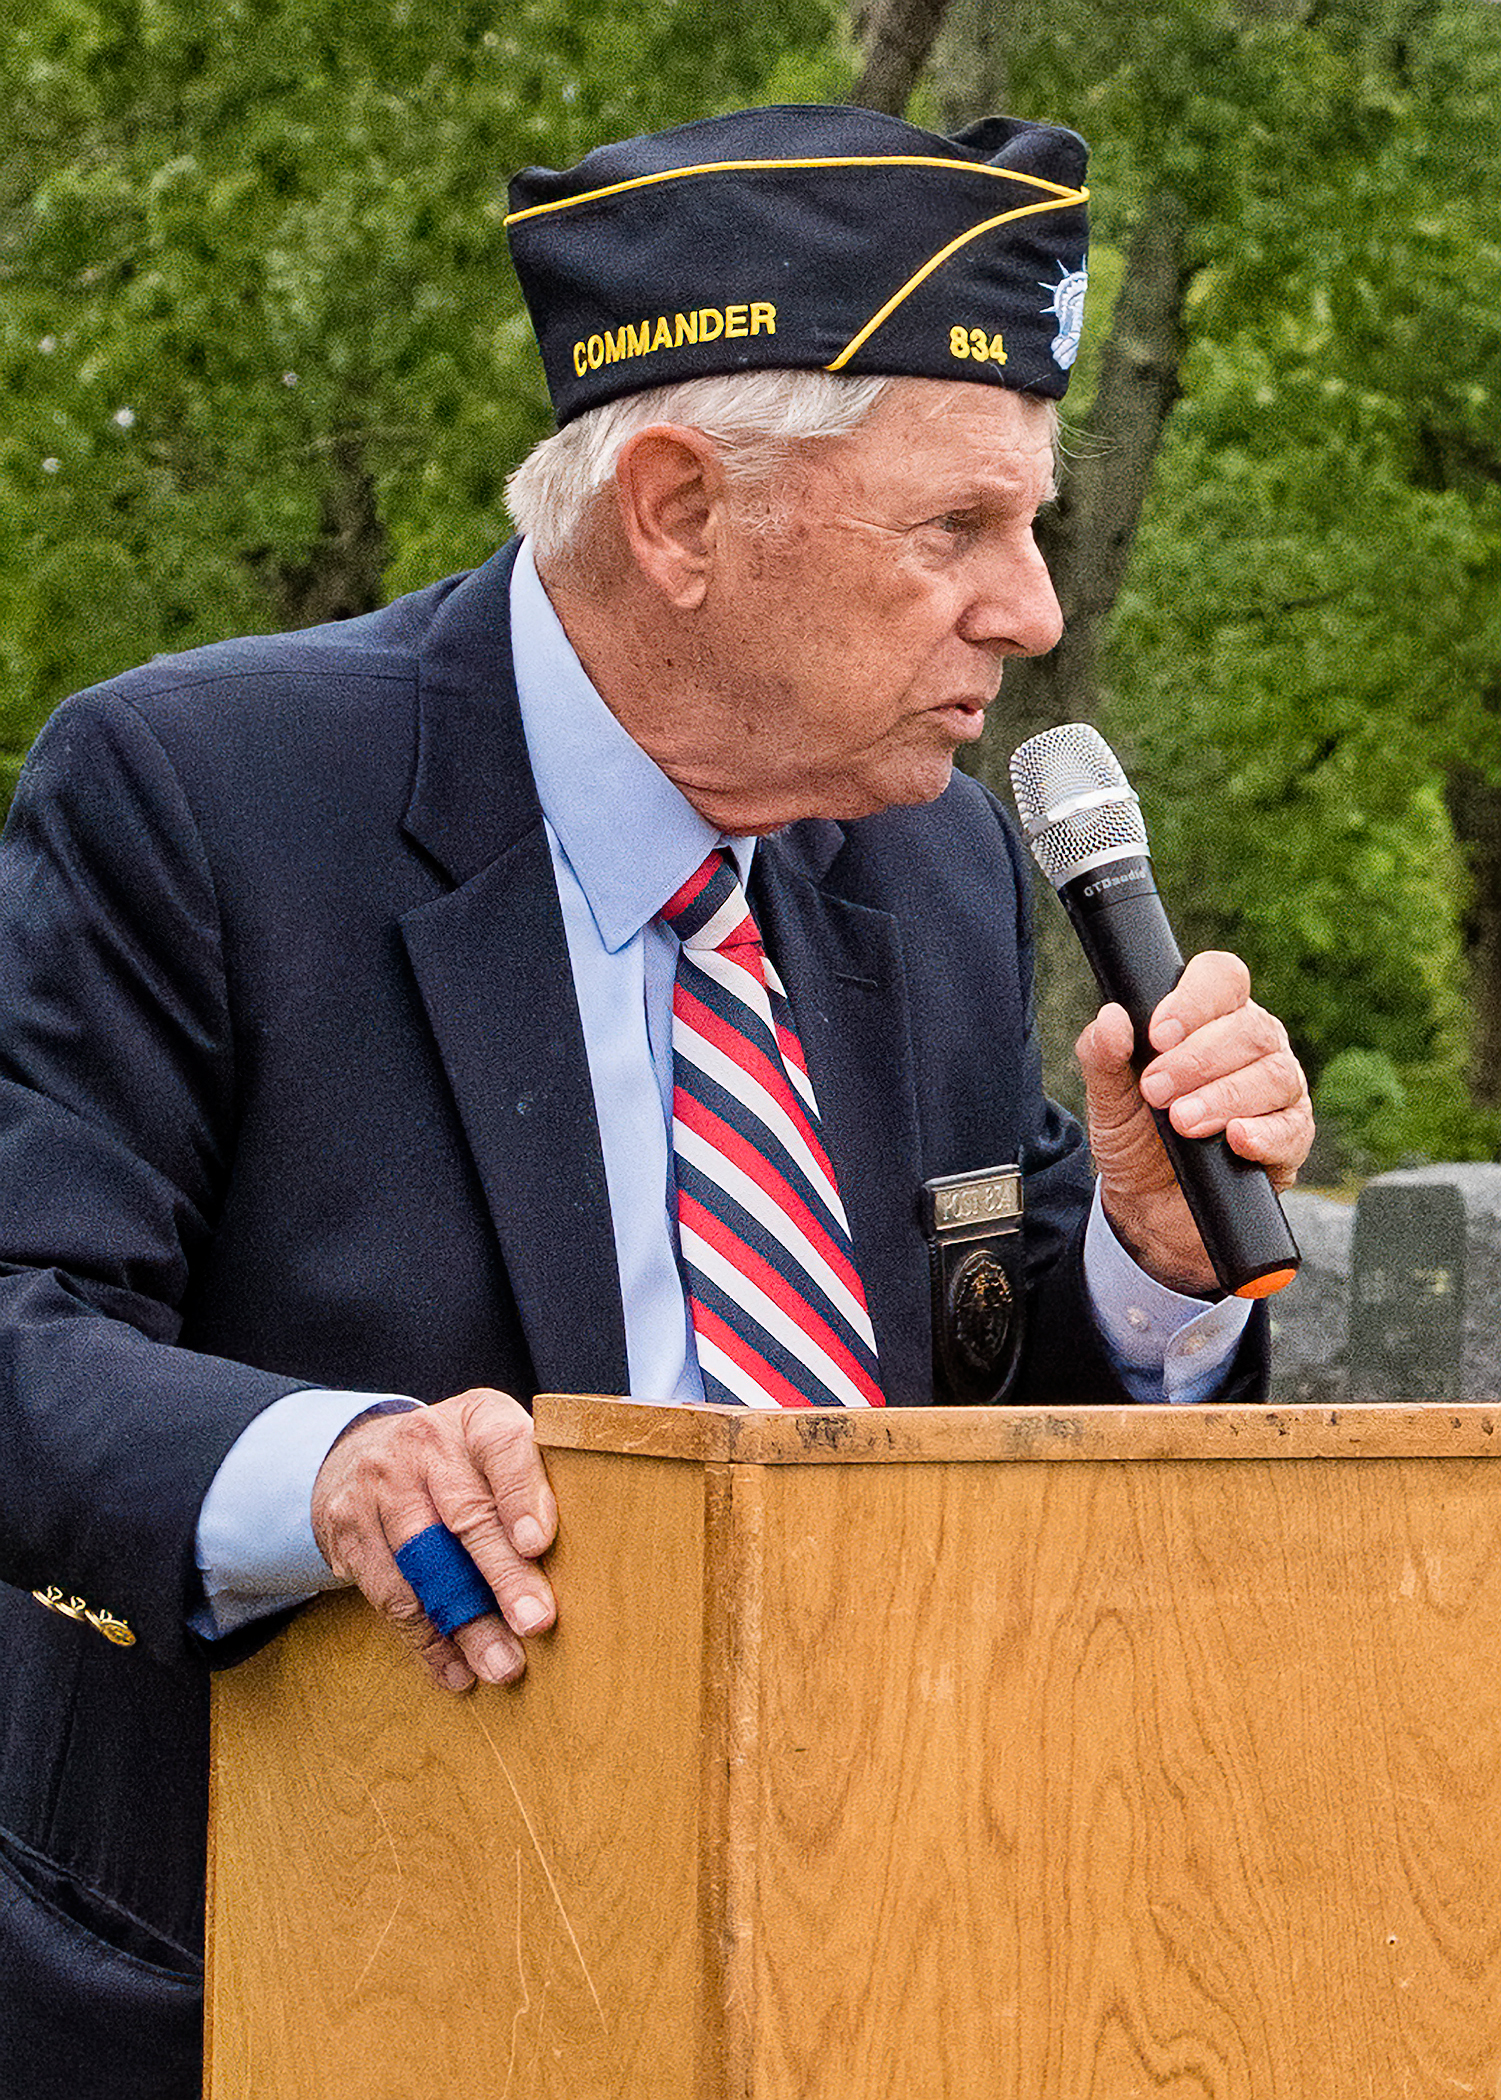 Tom Hadlock, commander of American Legion Post 834, addressed those attending the Westhampton Cemetery ceremony. COURTESY WESTHAMPTON BEACH FIRE DEPARTMENT